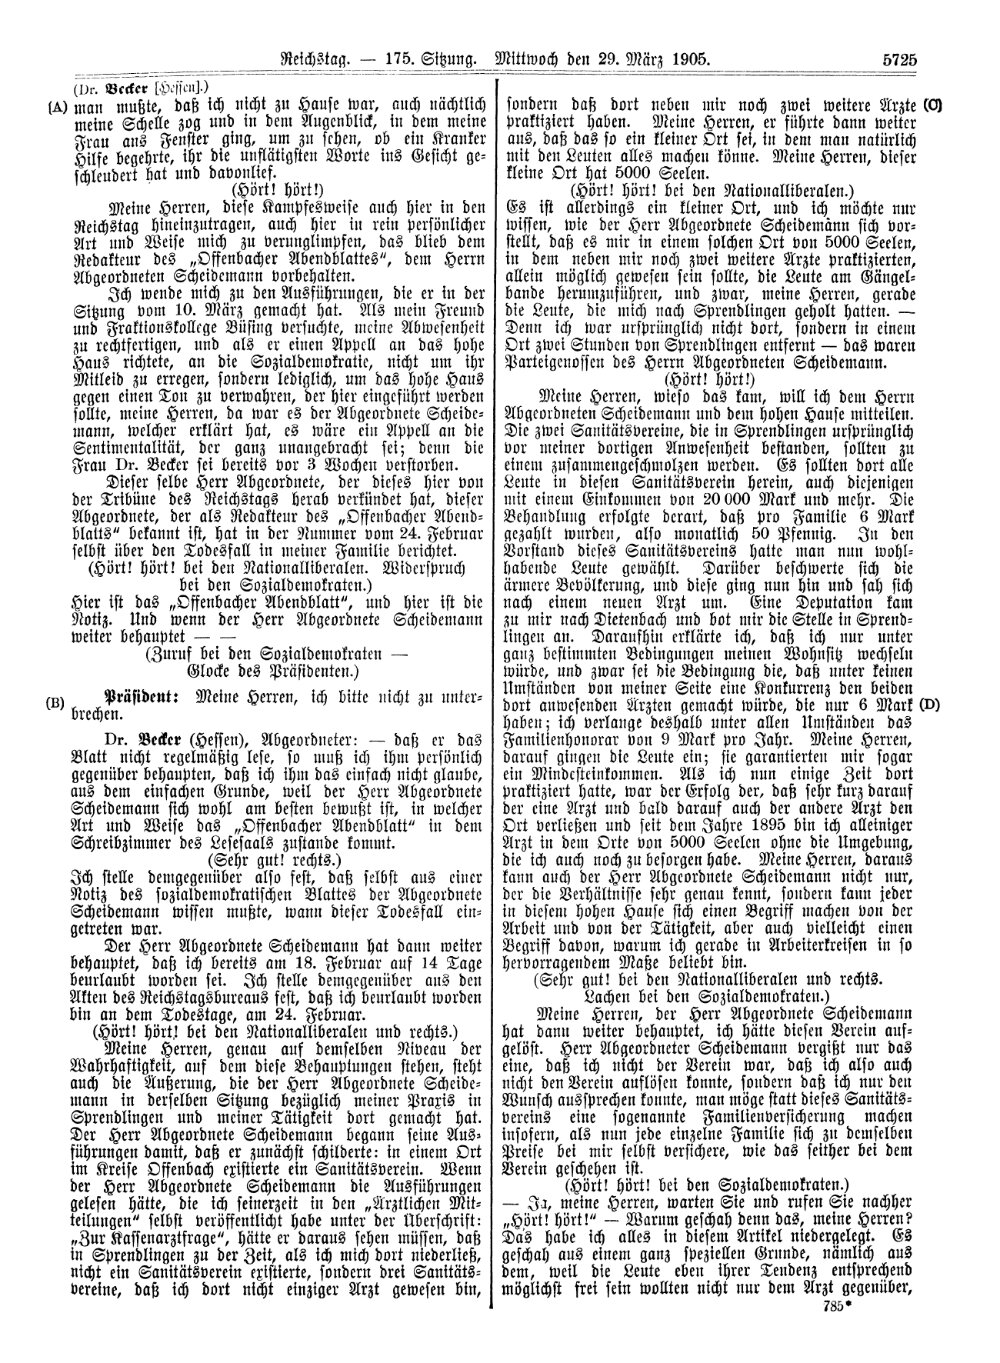 Scan of page 5725